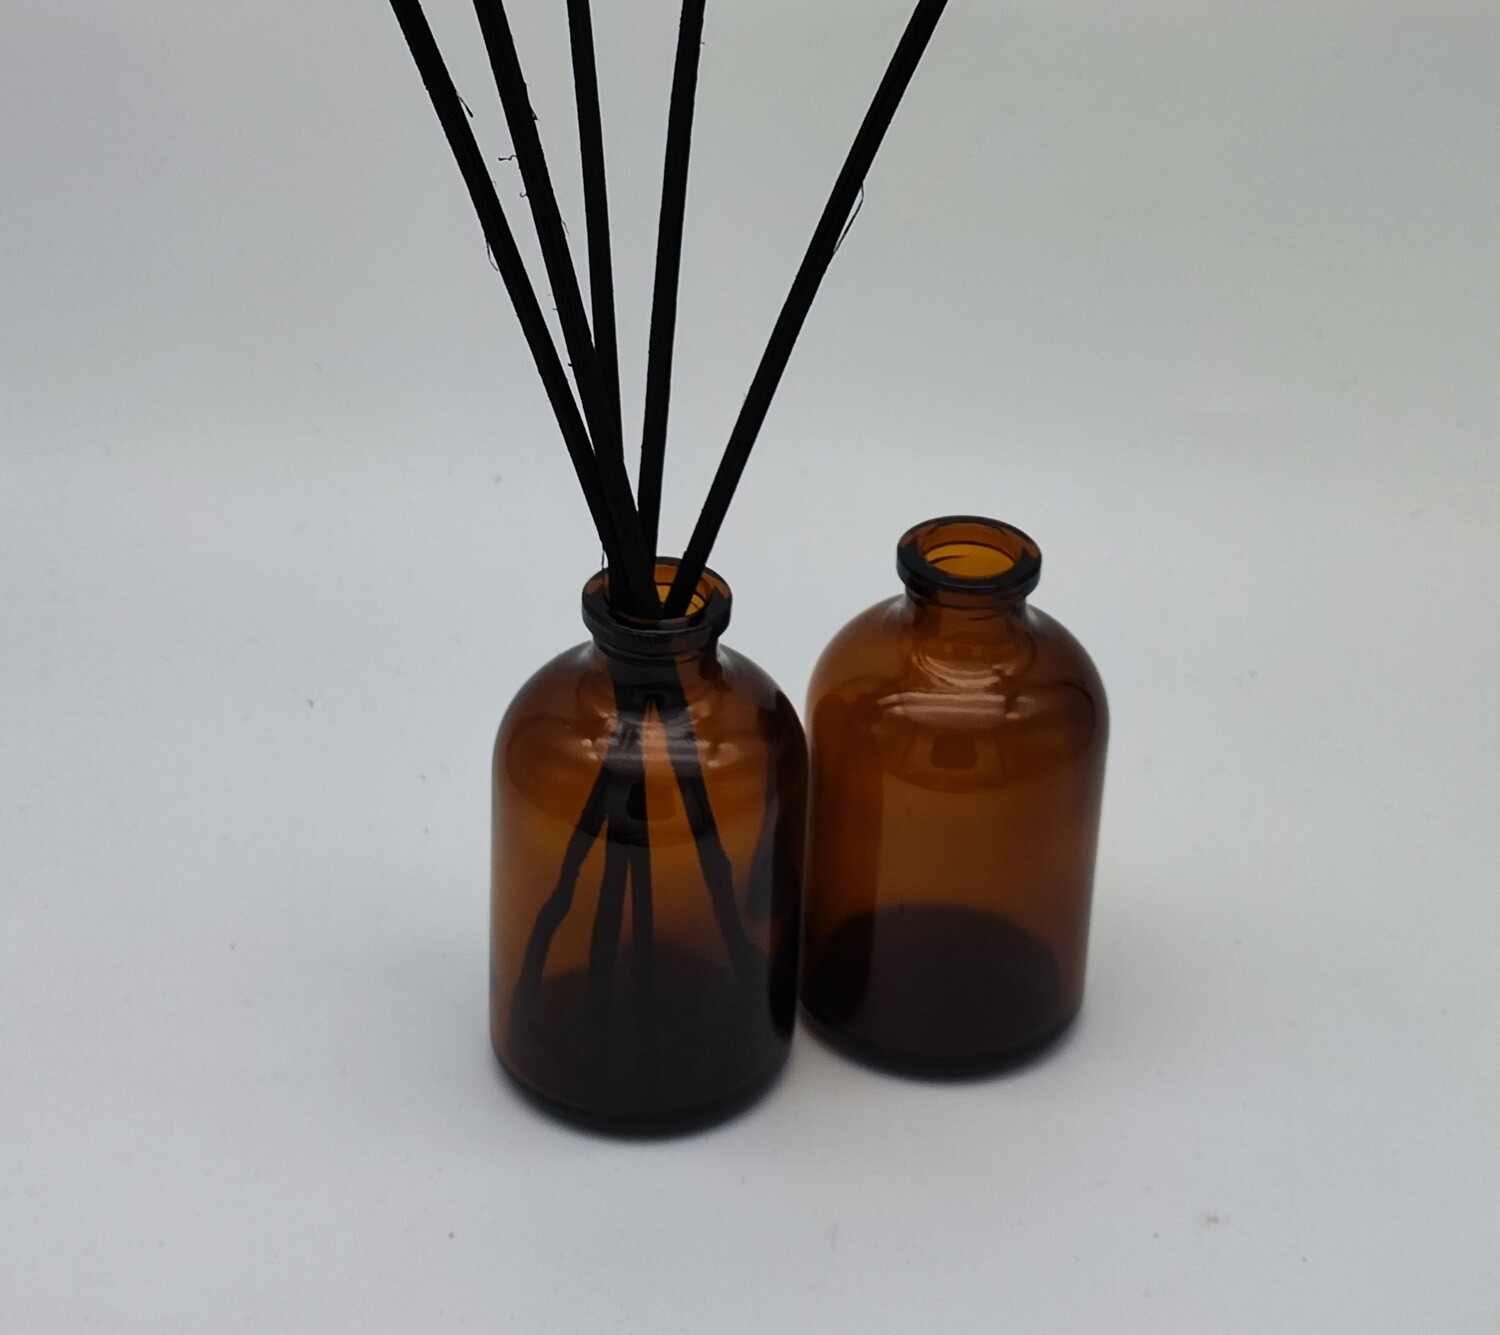 50mL AMBER GLASS Diffusers & 50 BLACK DIFFUSER STICKS - PACK of 10